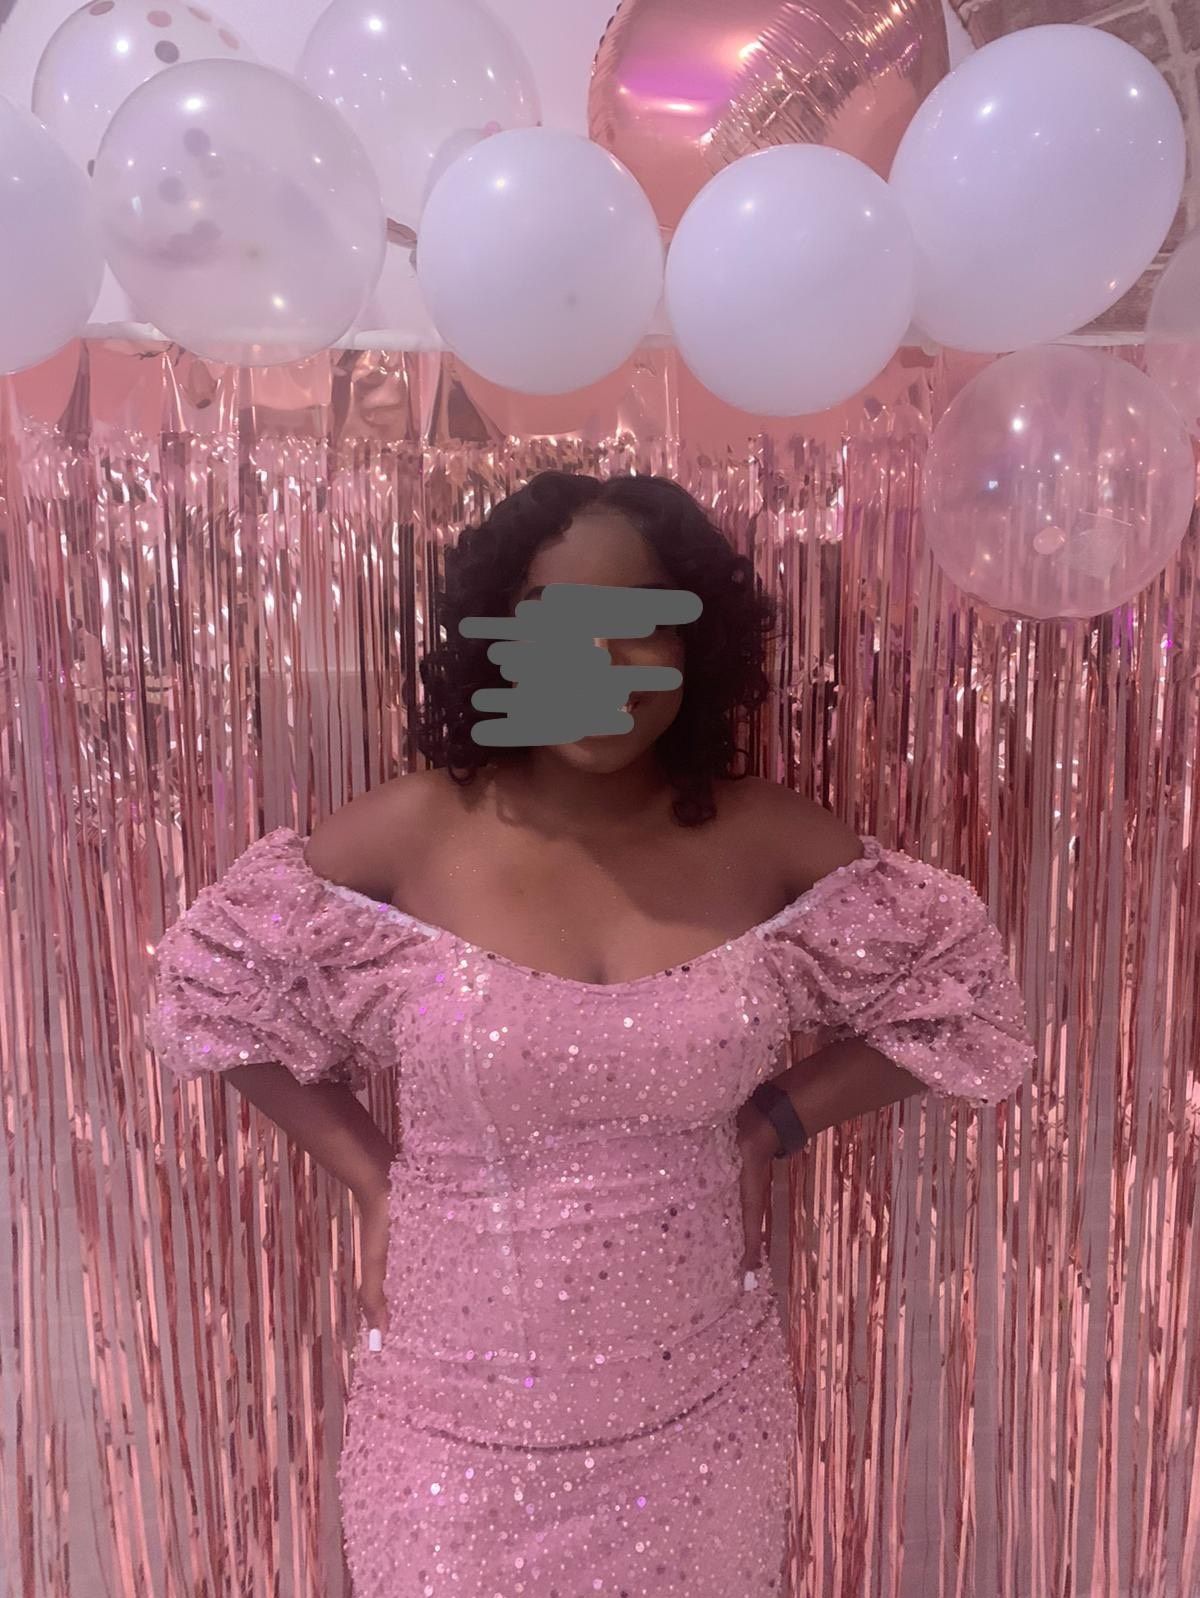 Size M Homecoming Off The Shoulder Sequined Rose Gold Cocktail Dress on Queenly